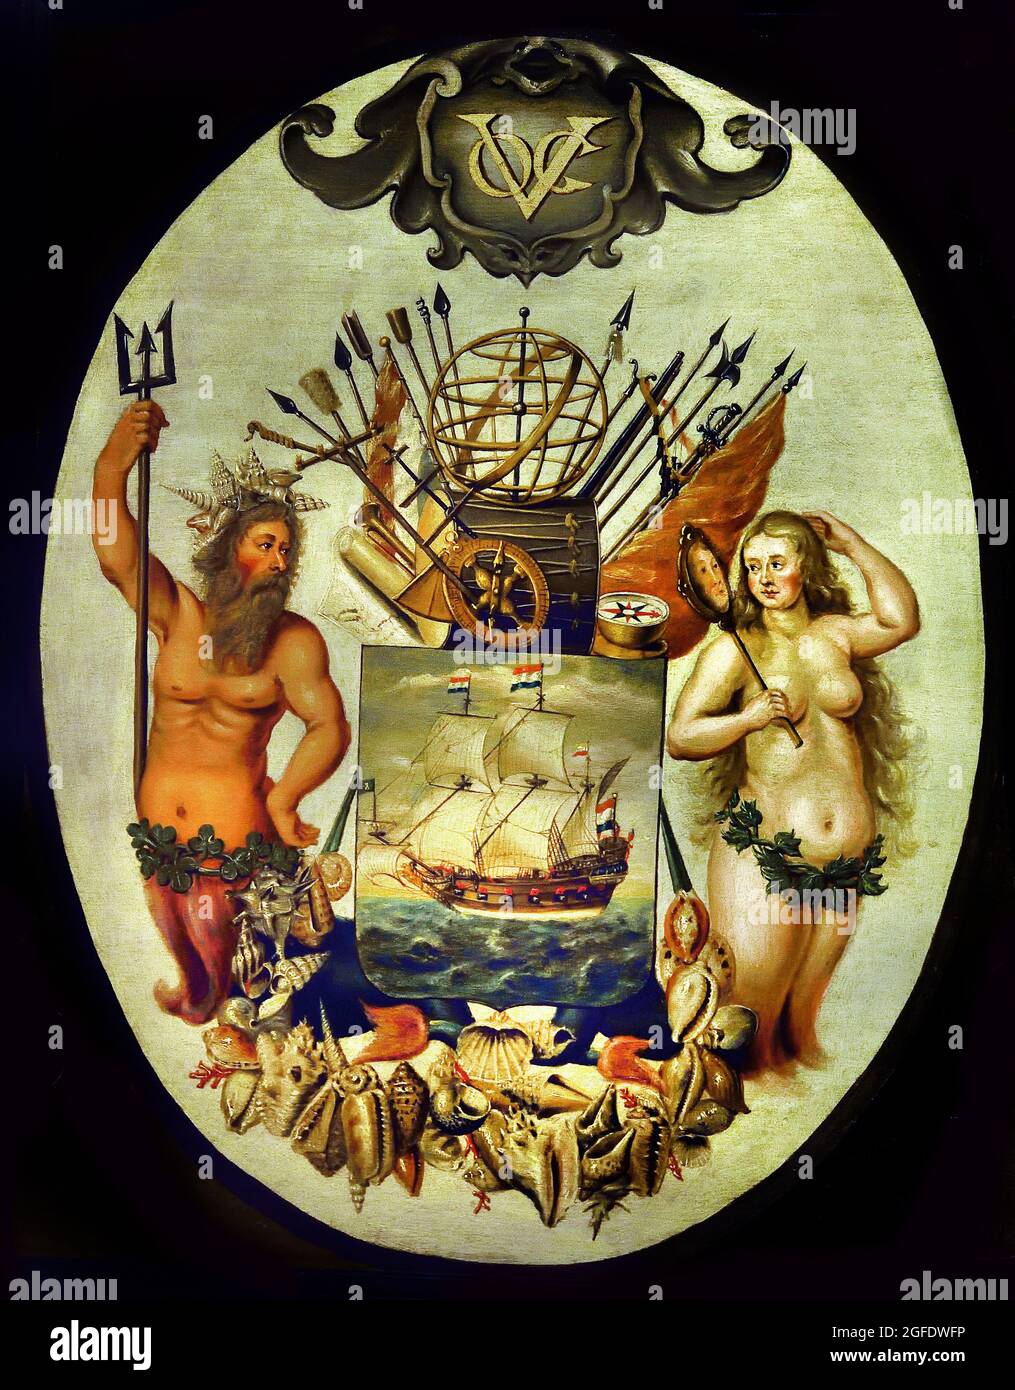 The arms of the VOC and Batavia, 1651 by Jeronimus Becx (II), 1651 oil on panel 63 X 97cm These coat of arms show the coat of arms of the VOC, decorated with Neptune and a mermaid, and the coat of arms of Batavia, flanked by Dutch lions. The town of Jacatra Jakarta became 'Conquered den 30 may 1619, according to this coat of arms. Governor-General Jan Pietersz Coen renamed Jacatra Batavia and, in the same year, had a castle built with wharves, warehouses and offices.  Dutch, The Netherlands . Stock Photo